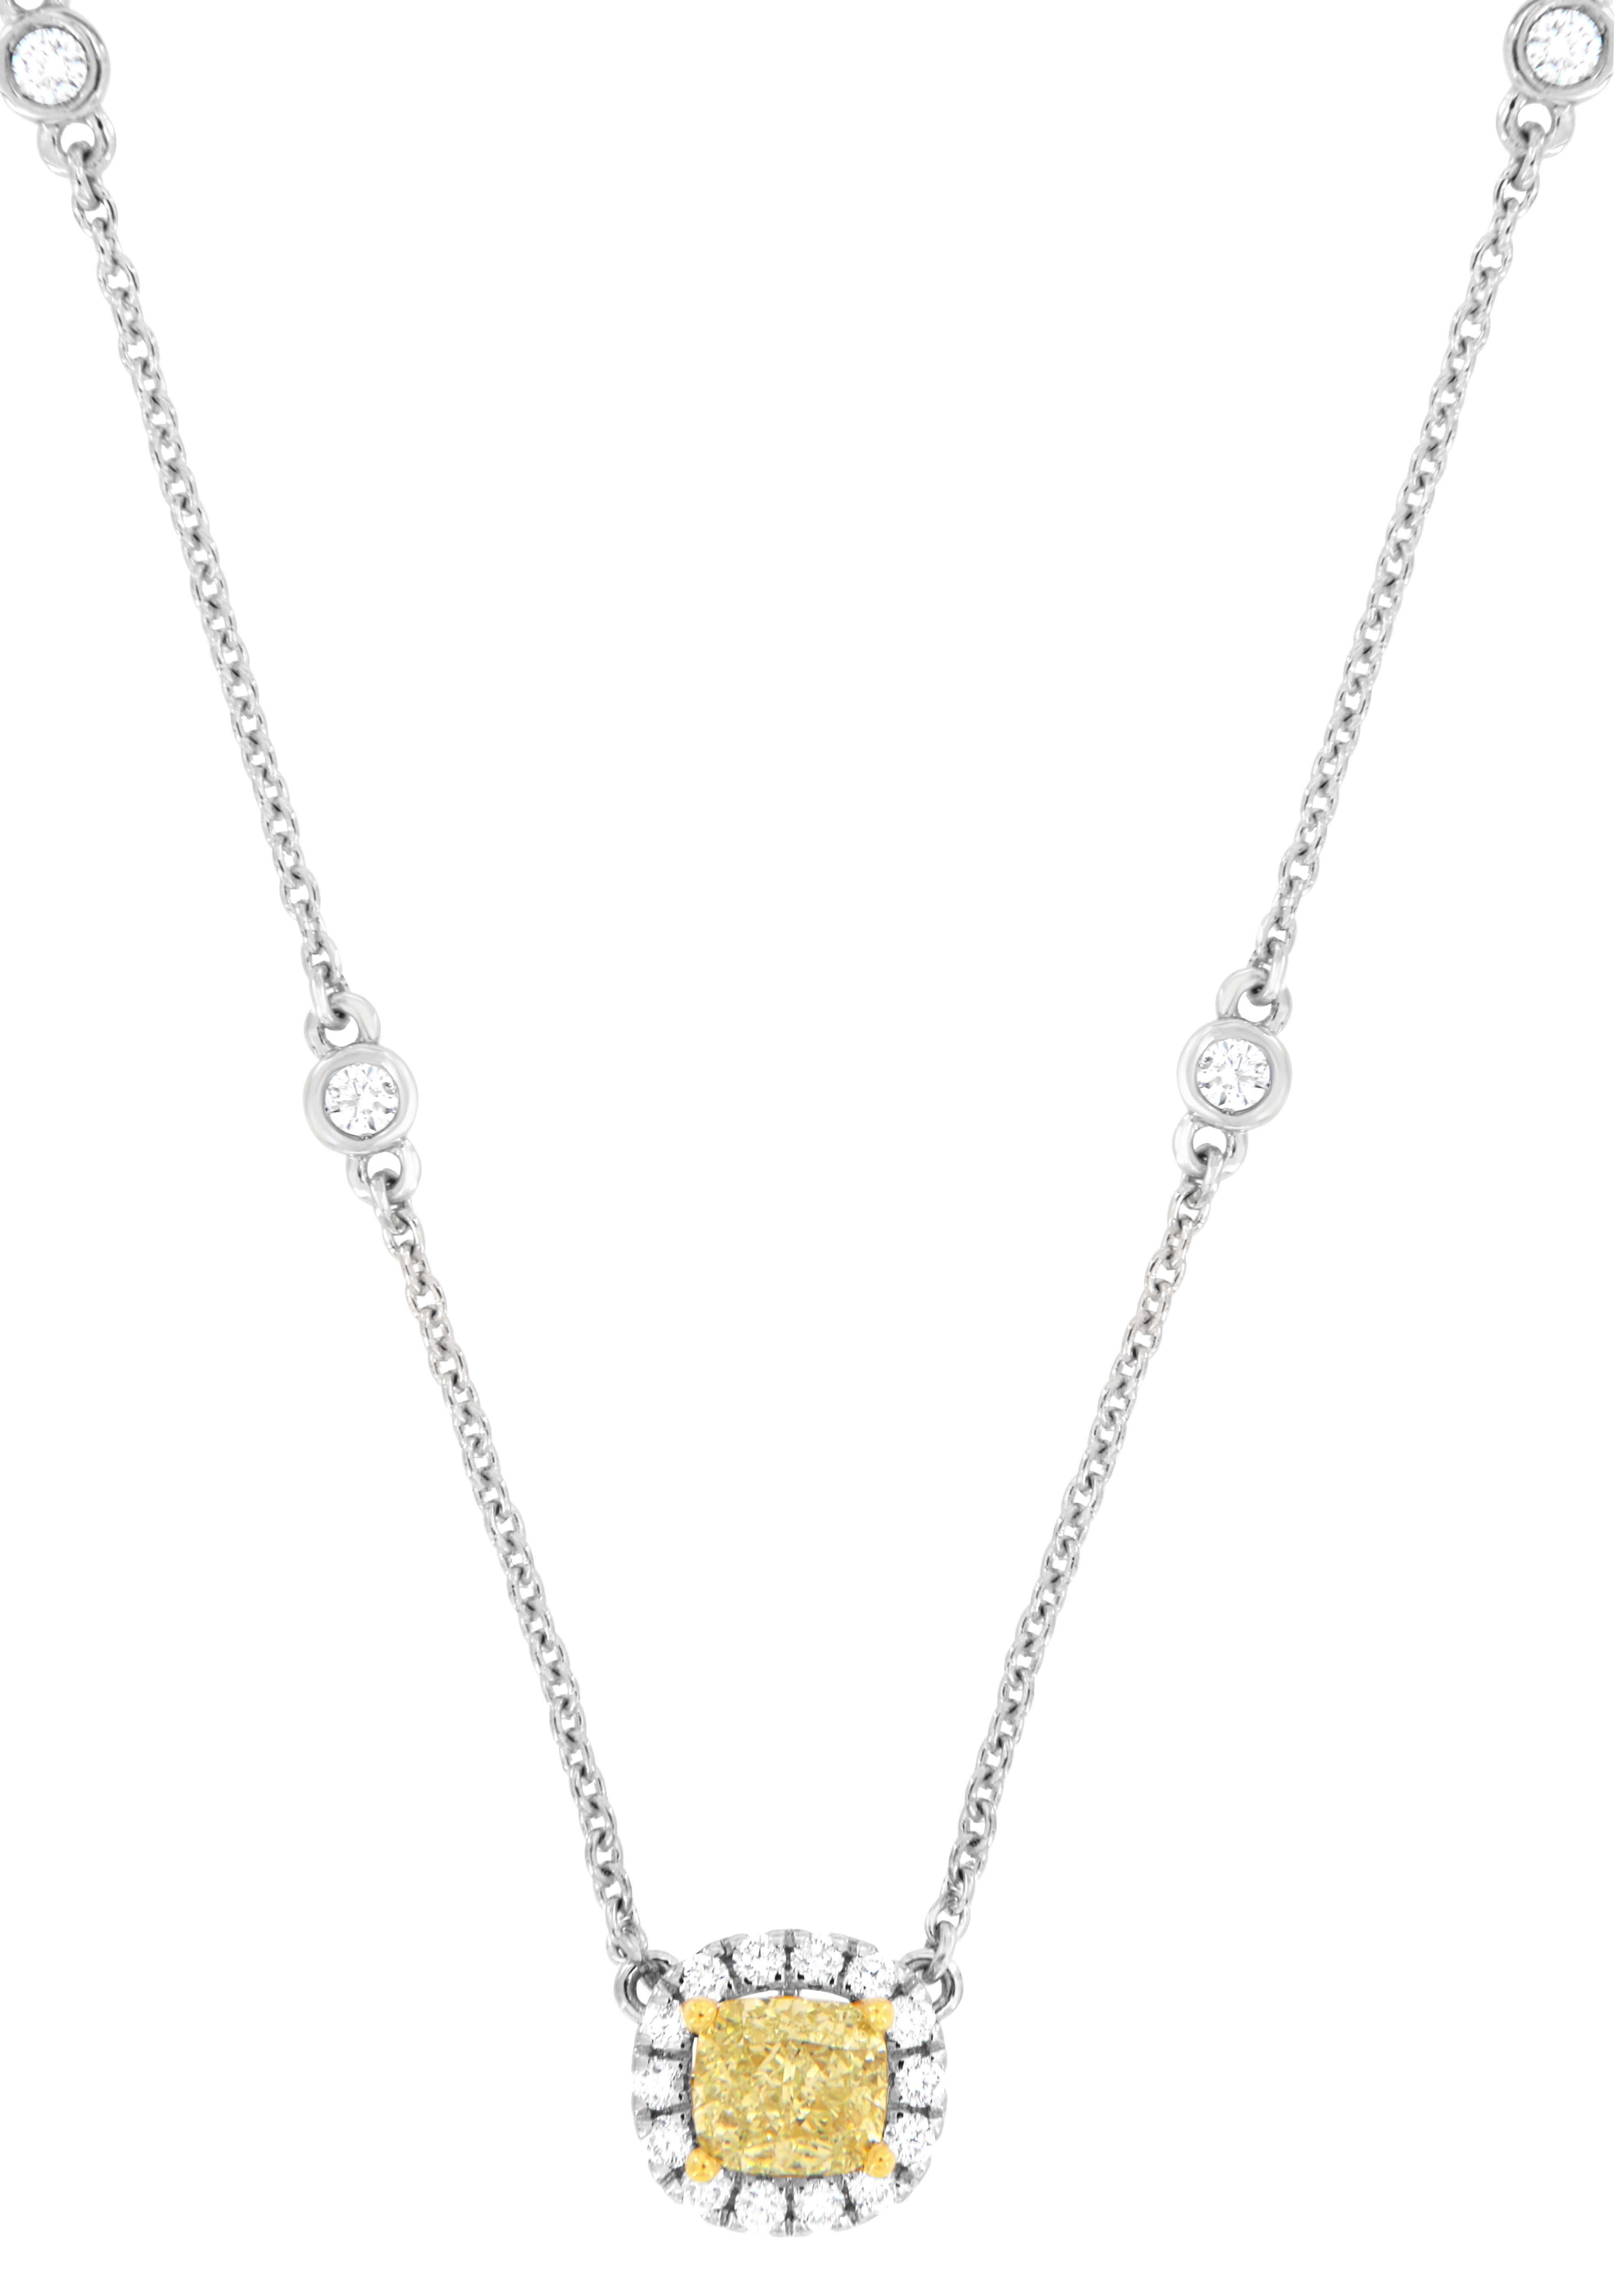 18K White & Yellow Gold 0.52 Carat Elongated Cushion Yellow Diamond Necklace For Sale